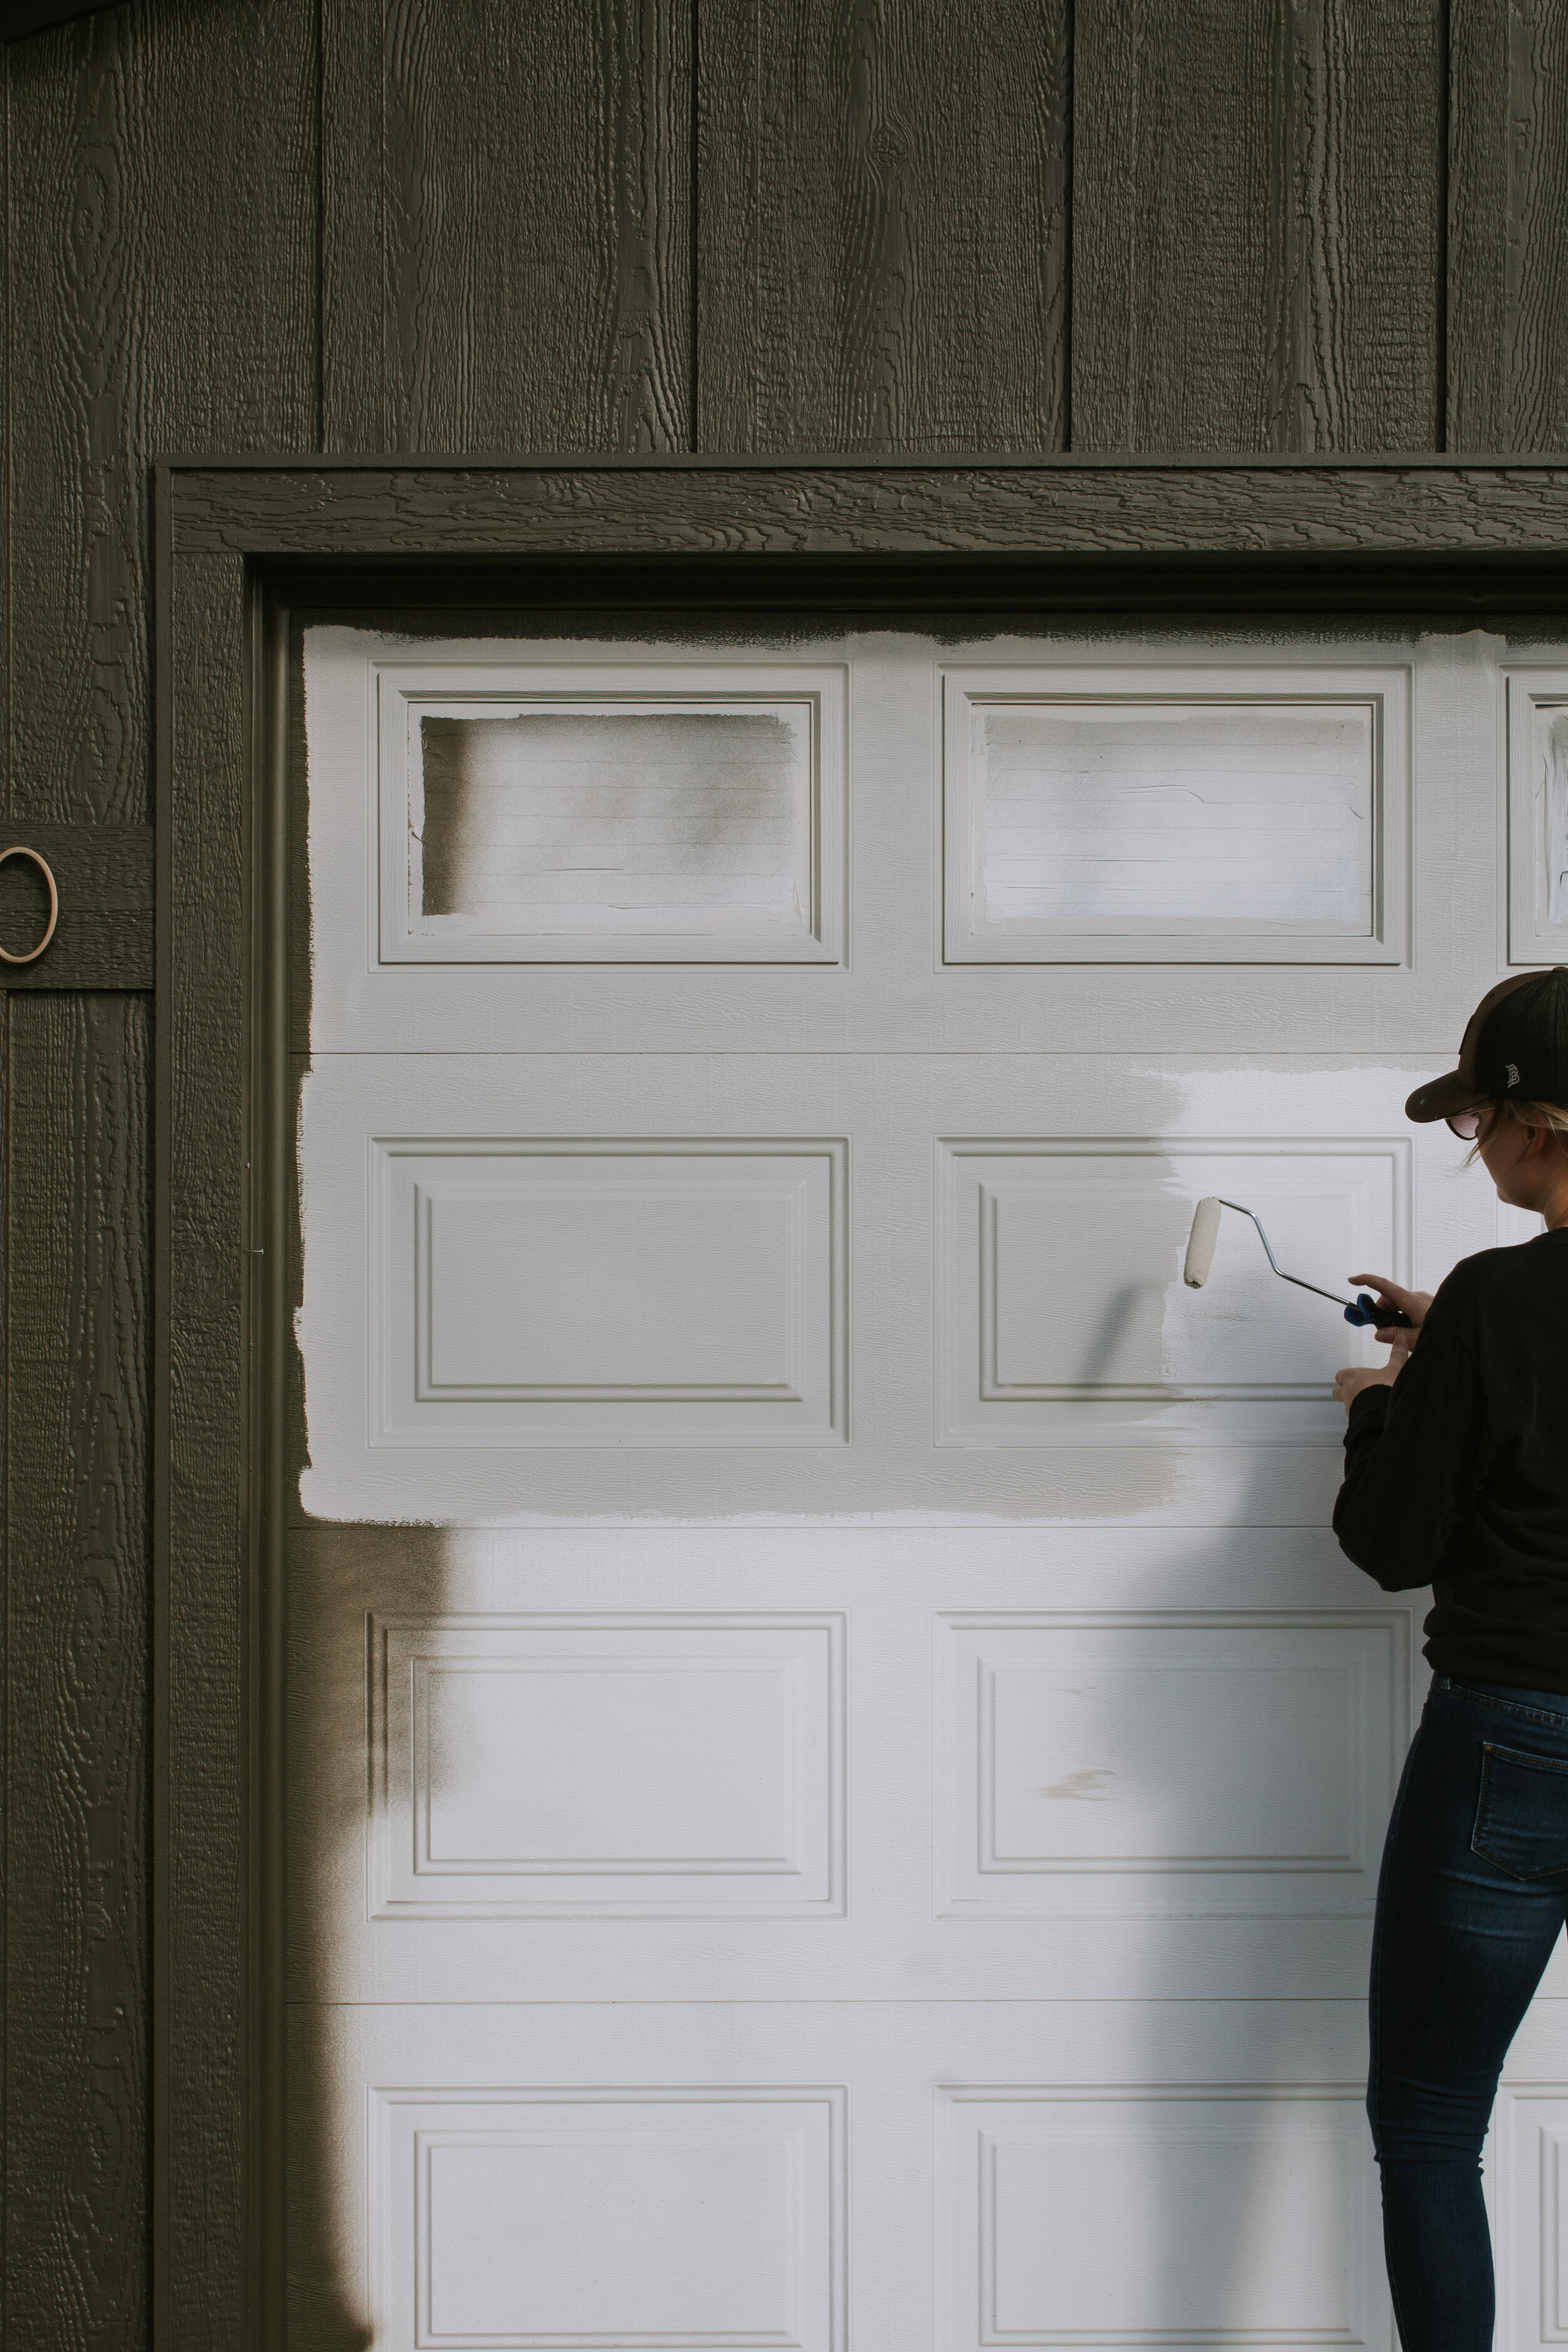 How to paint metal garage doors - Nadine Stay | Tips for painting old garage doors and the paint and primer you should use.